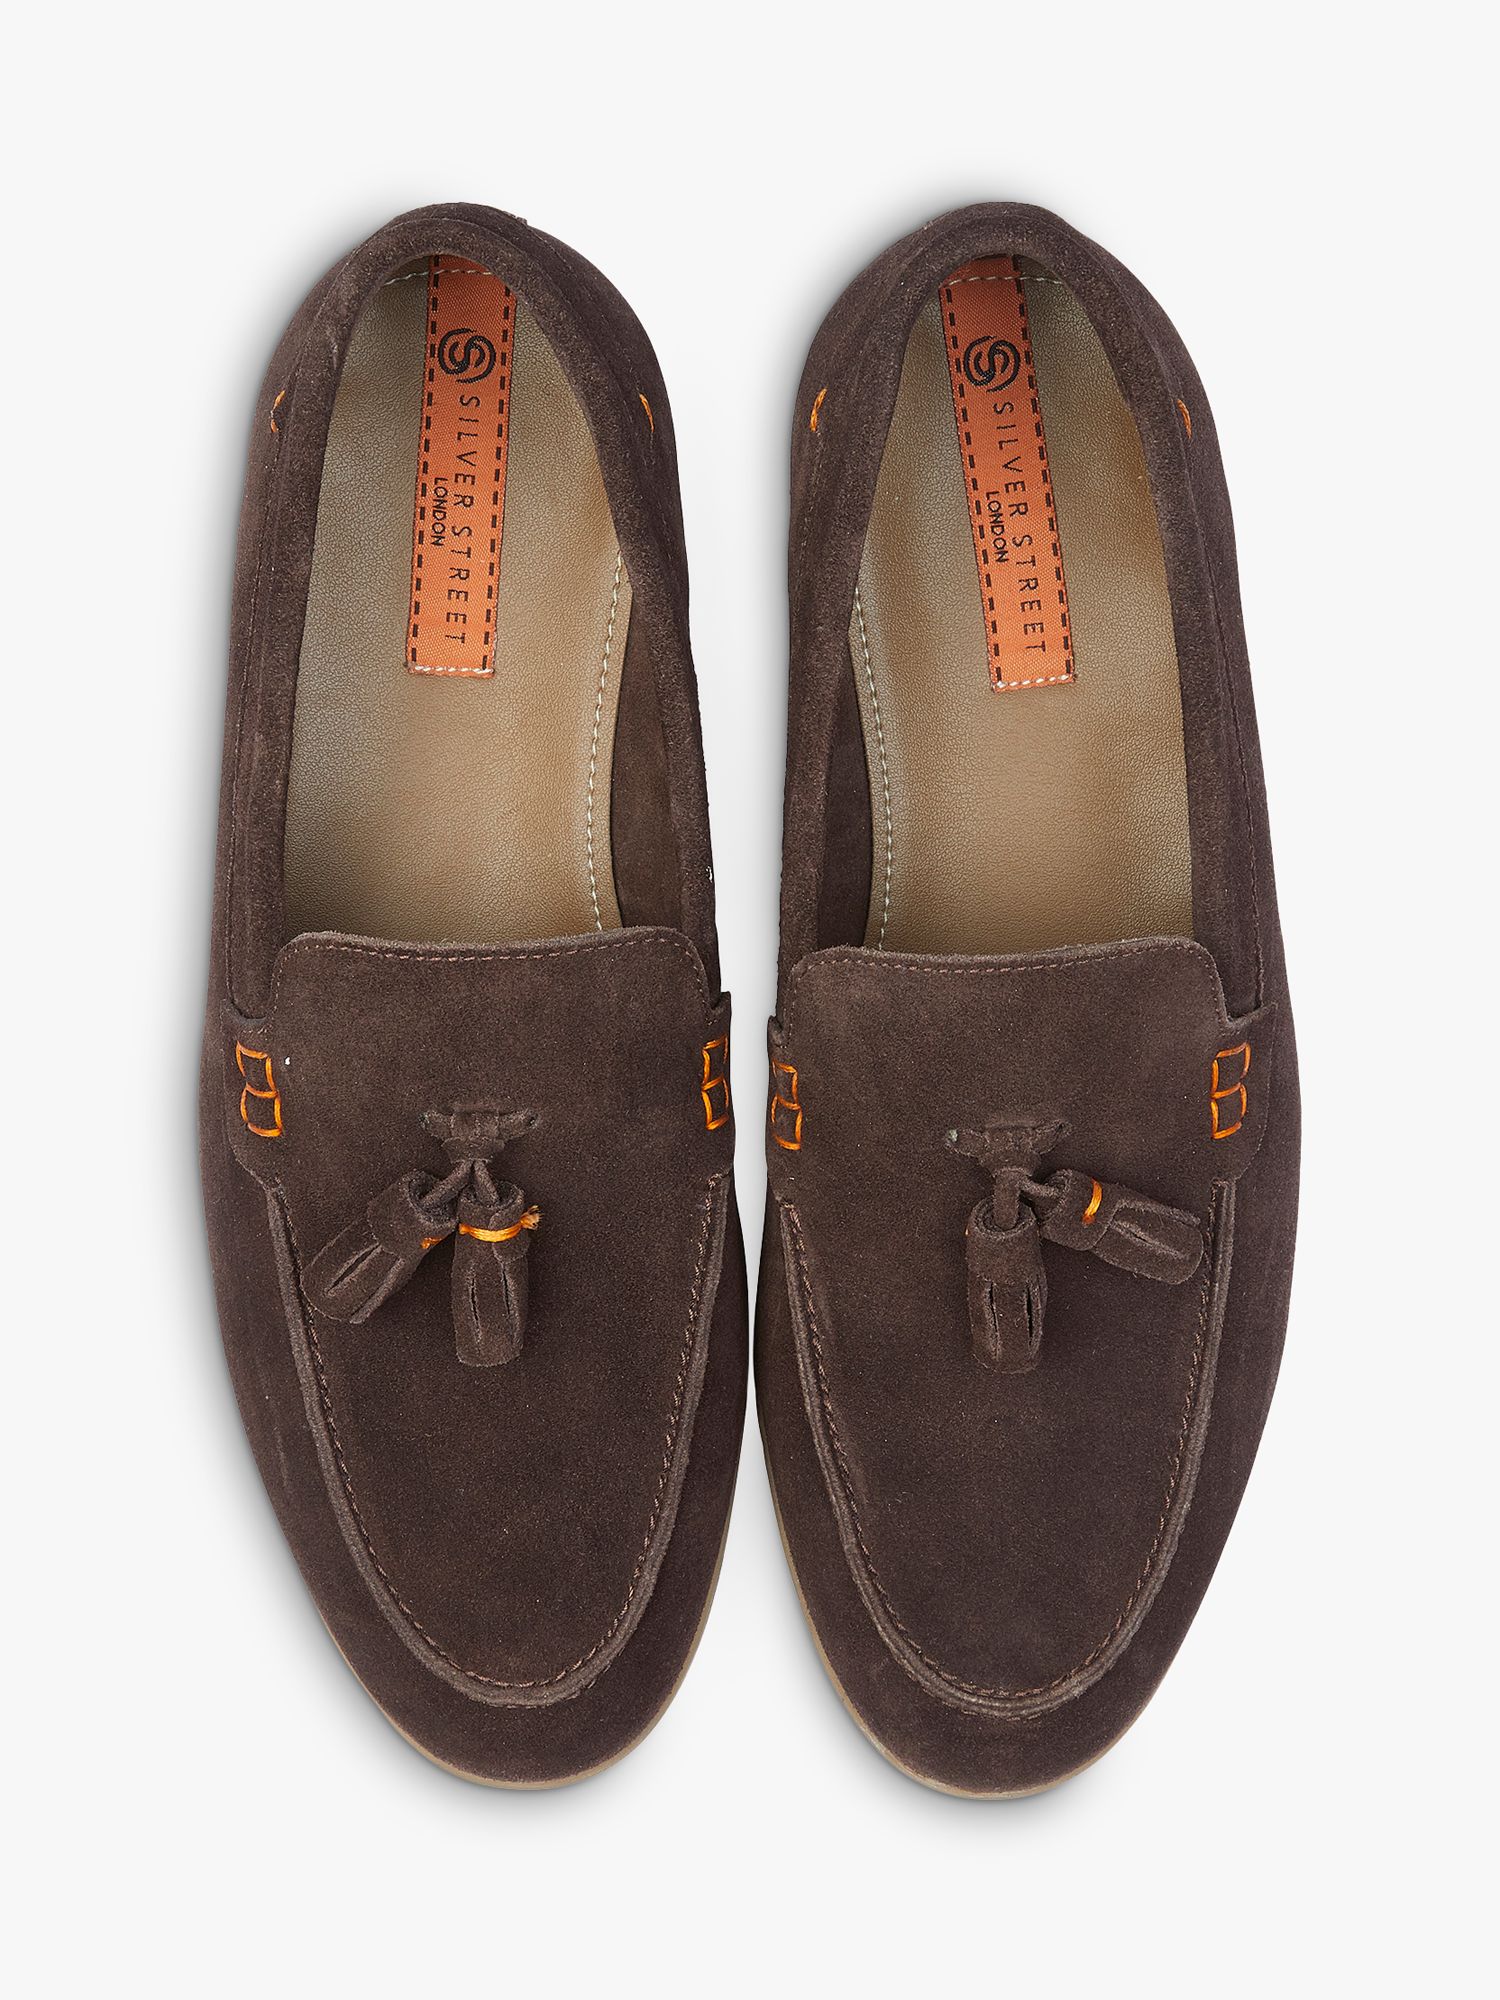 Silver Street London Wembley Suede Loafers, Brown, 7